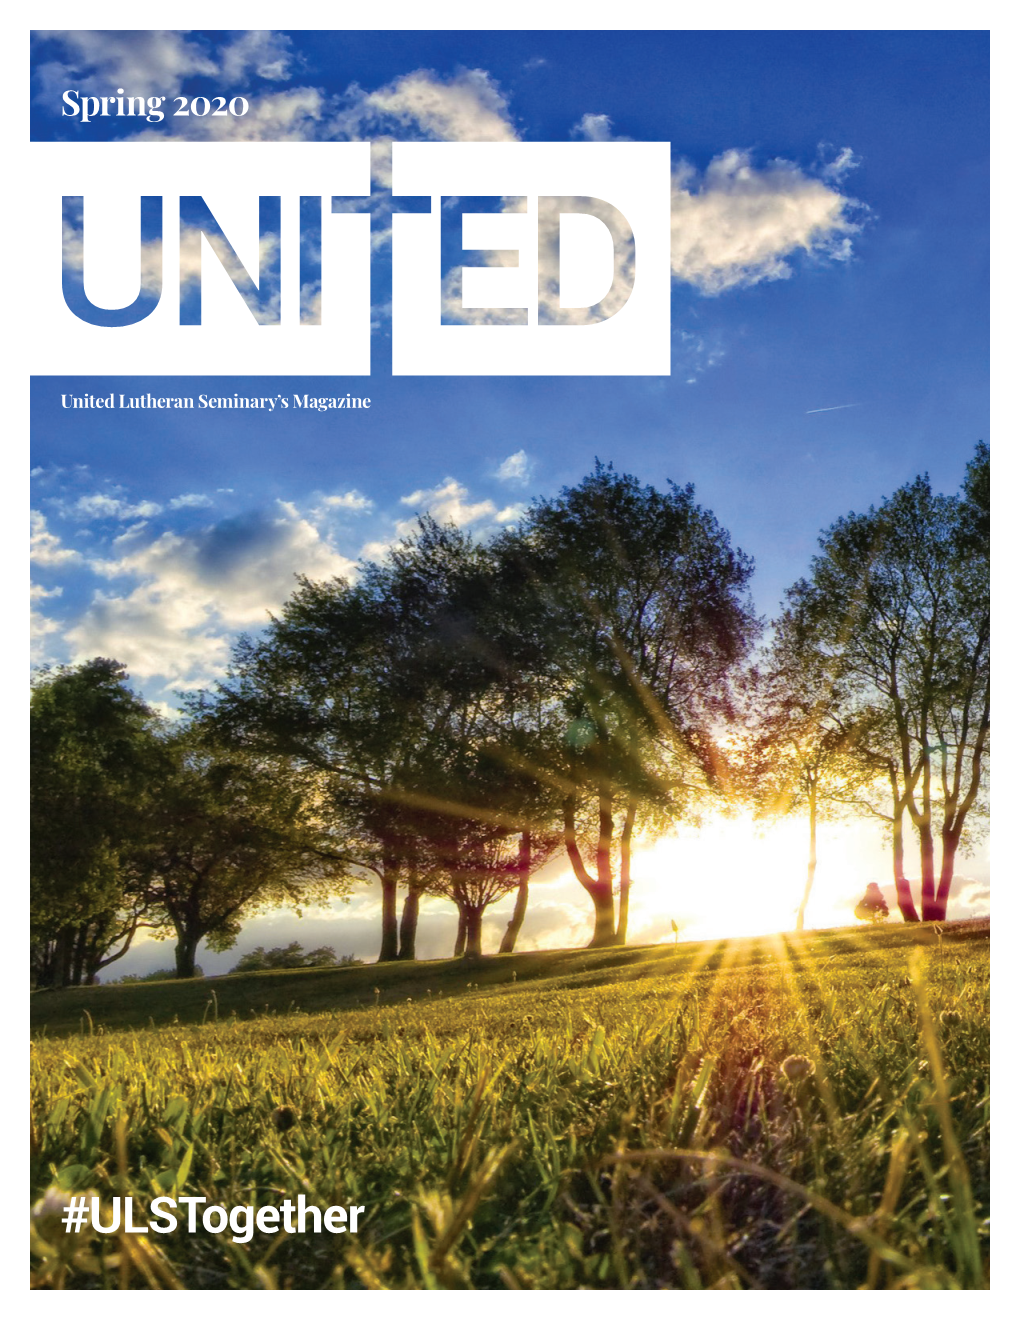 UNITED Magazine, So Much Has Happened to Alter the Way We Preach, Teach, Learn and Serve